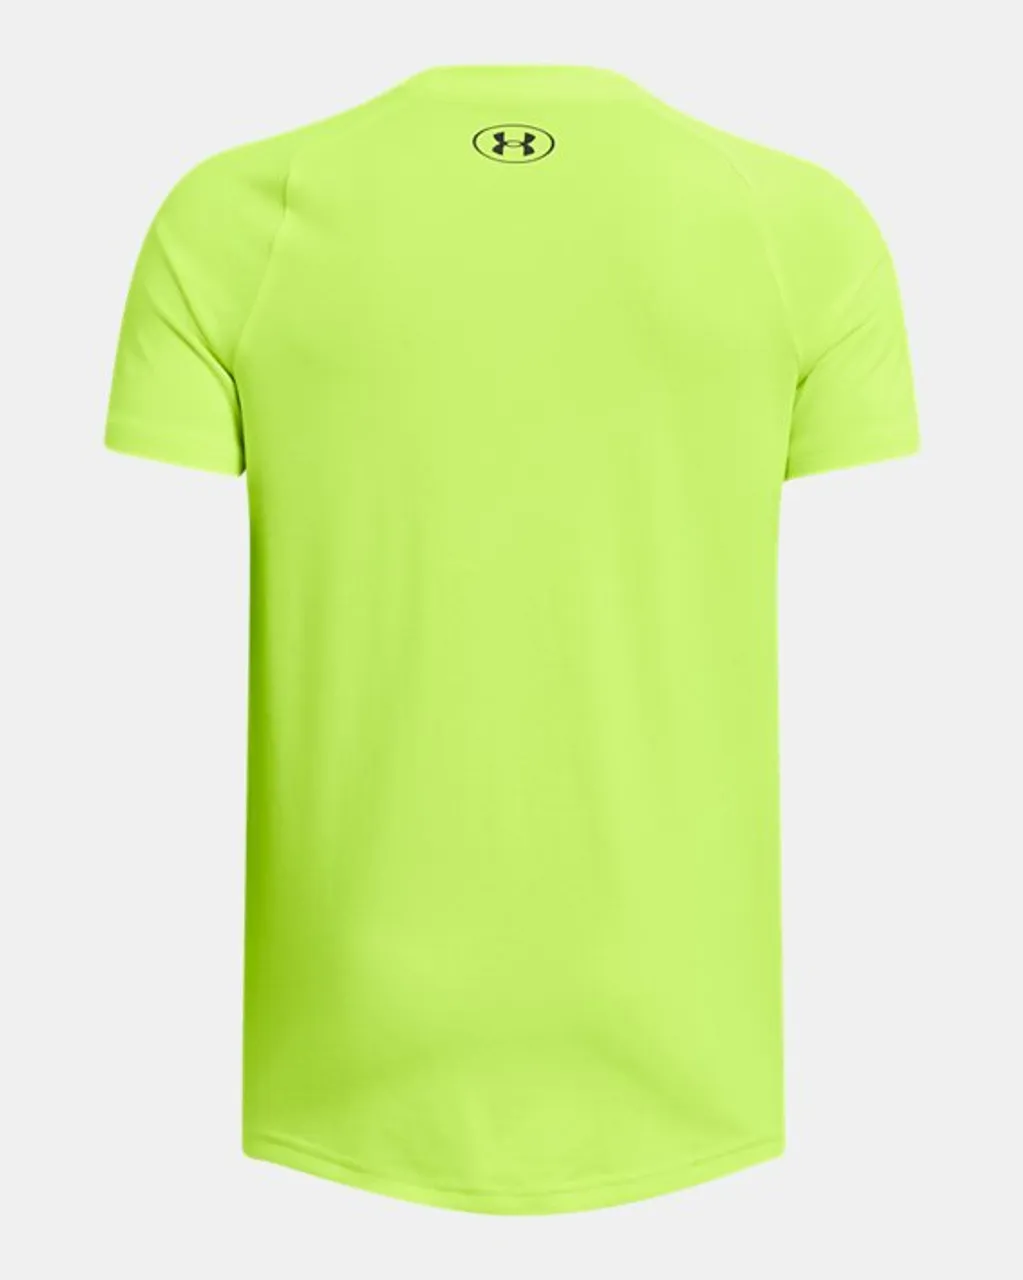 Boys'  Under Armour  Tech™ 2.0 Short Sleeve High Vis Yellow / Black YLG (59 - 63 in)